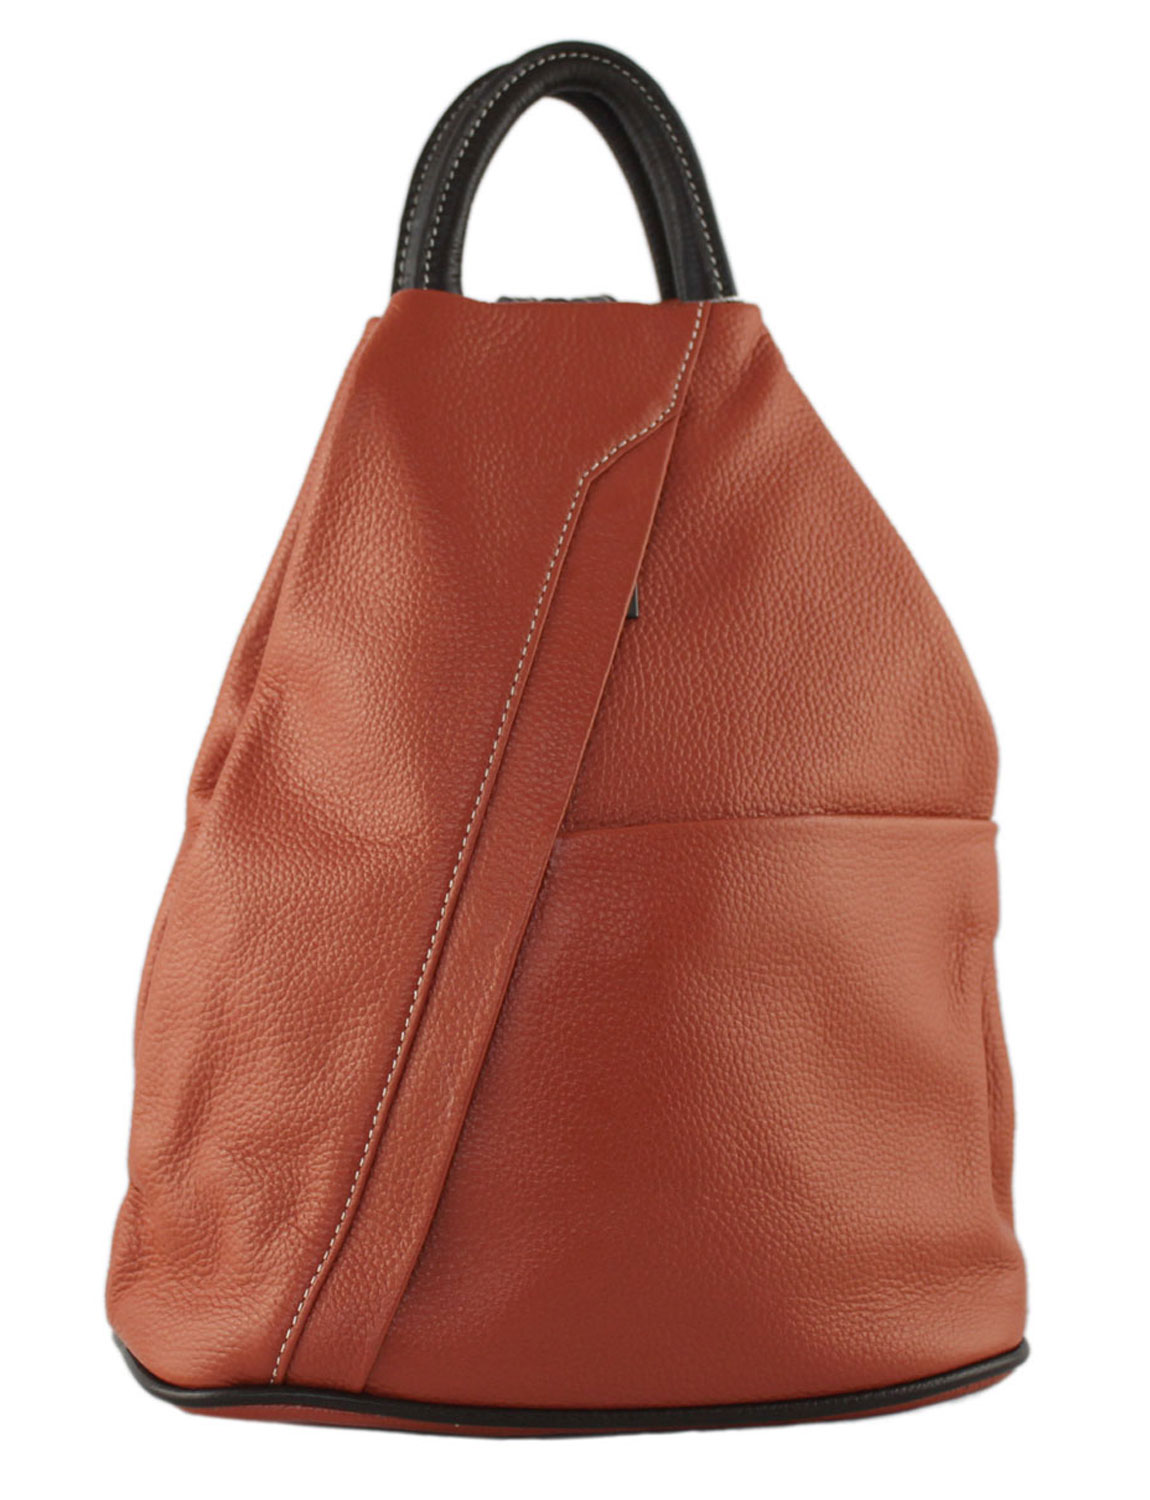 Tuscany Soft Leather Backpack in Brick Red With Brown Trim